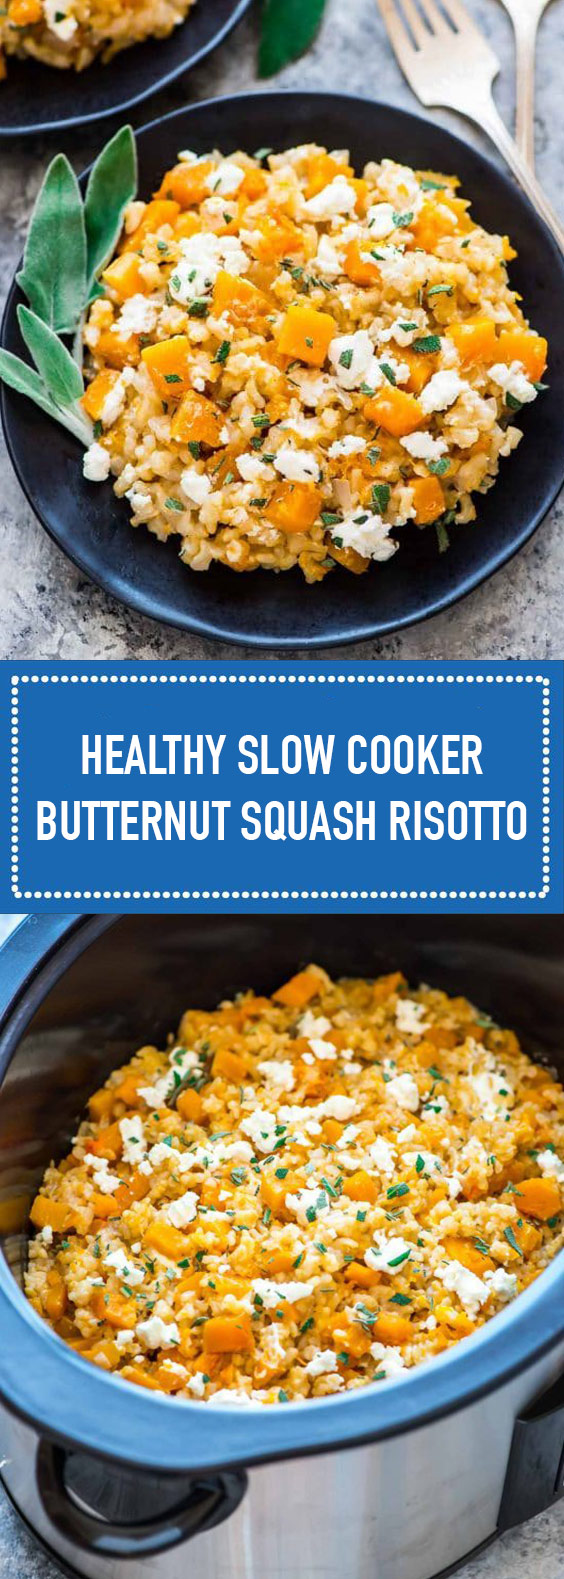 Healthy Slow Cooker Butternut Squash Risotto